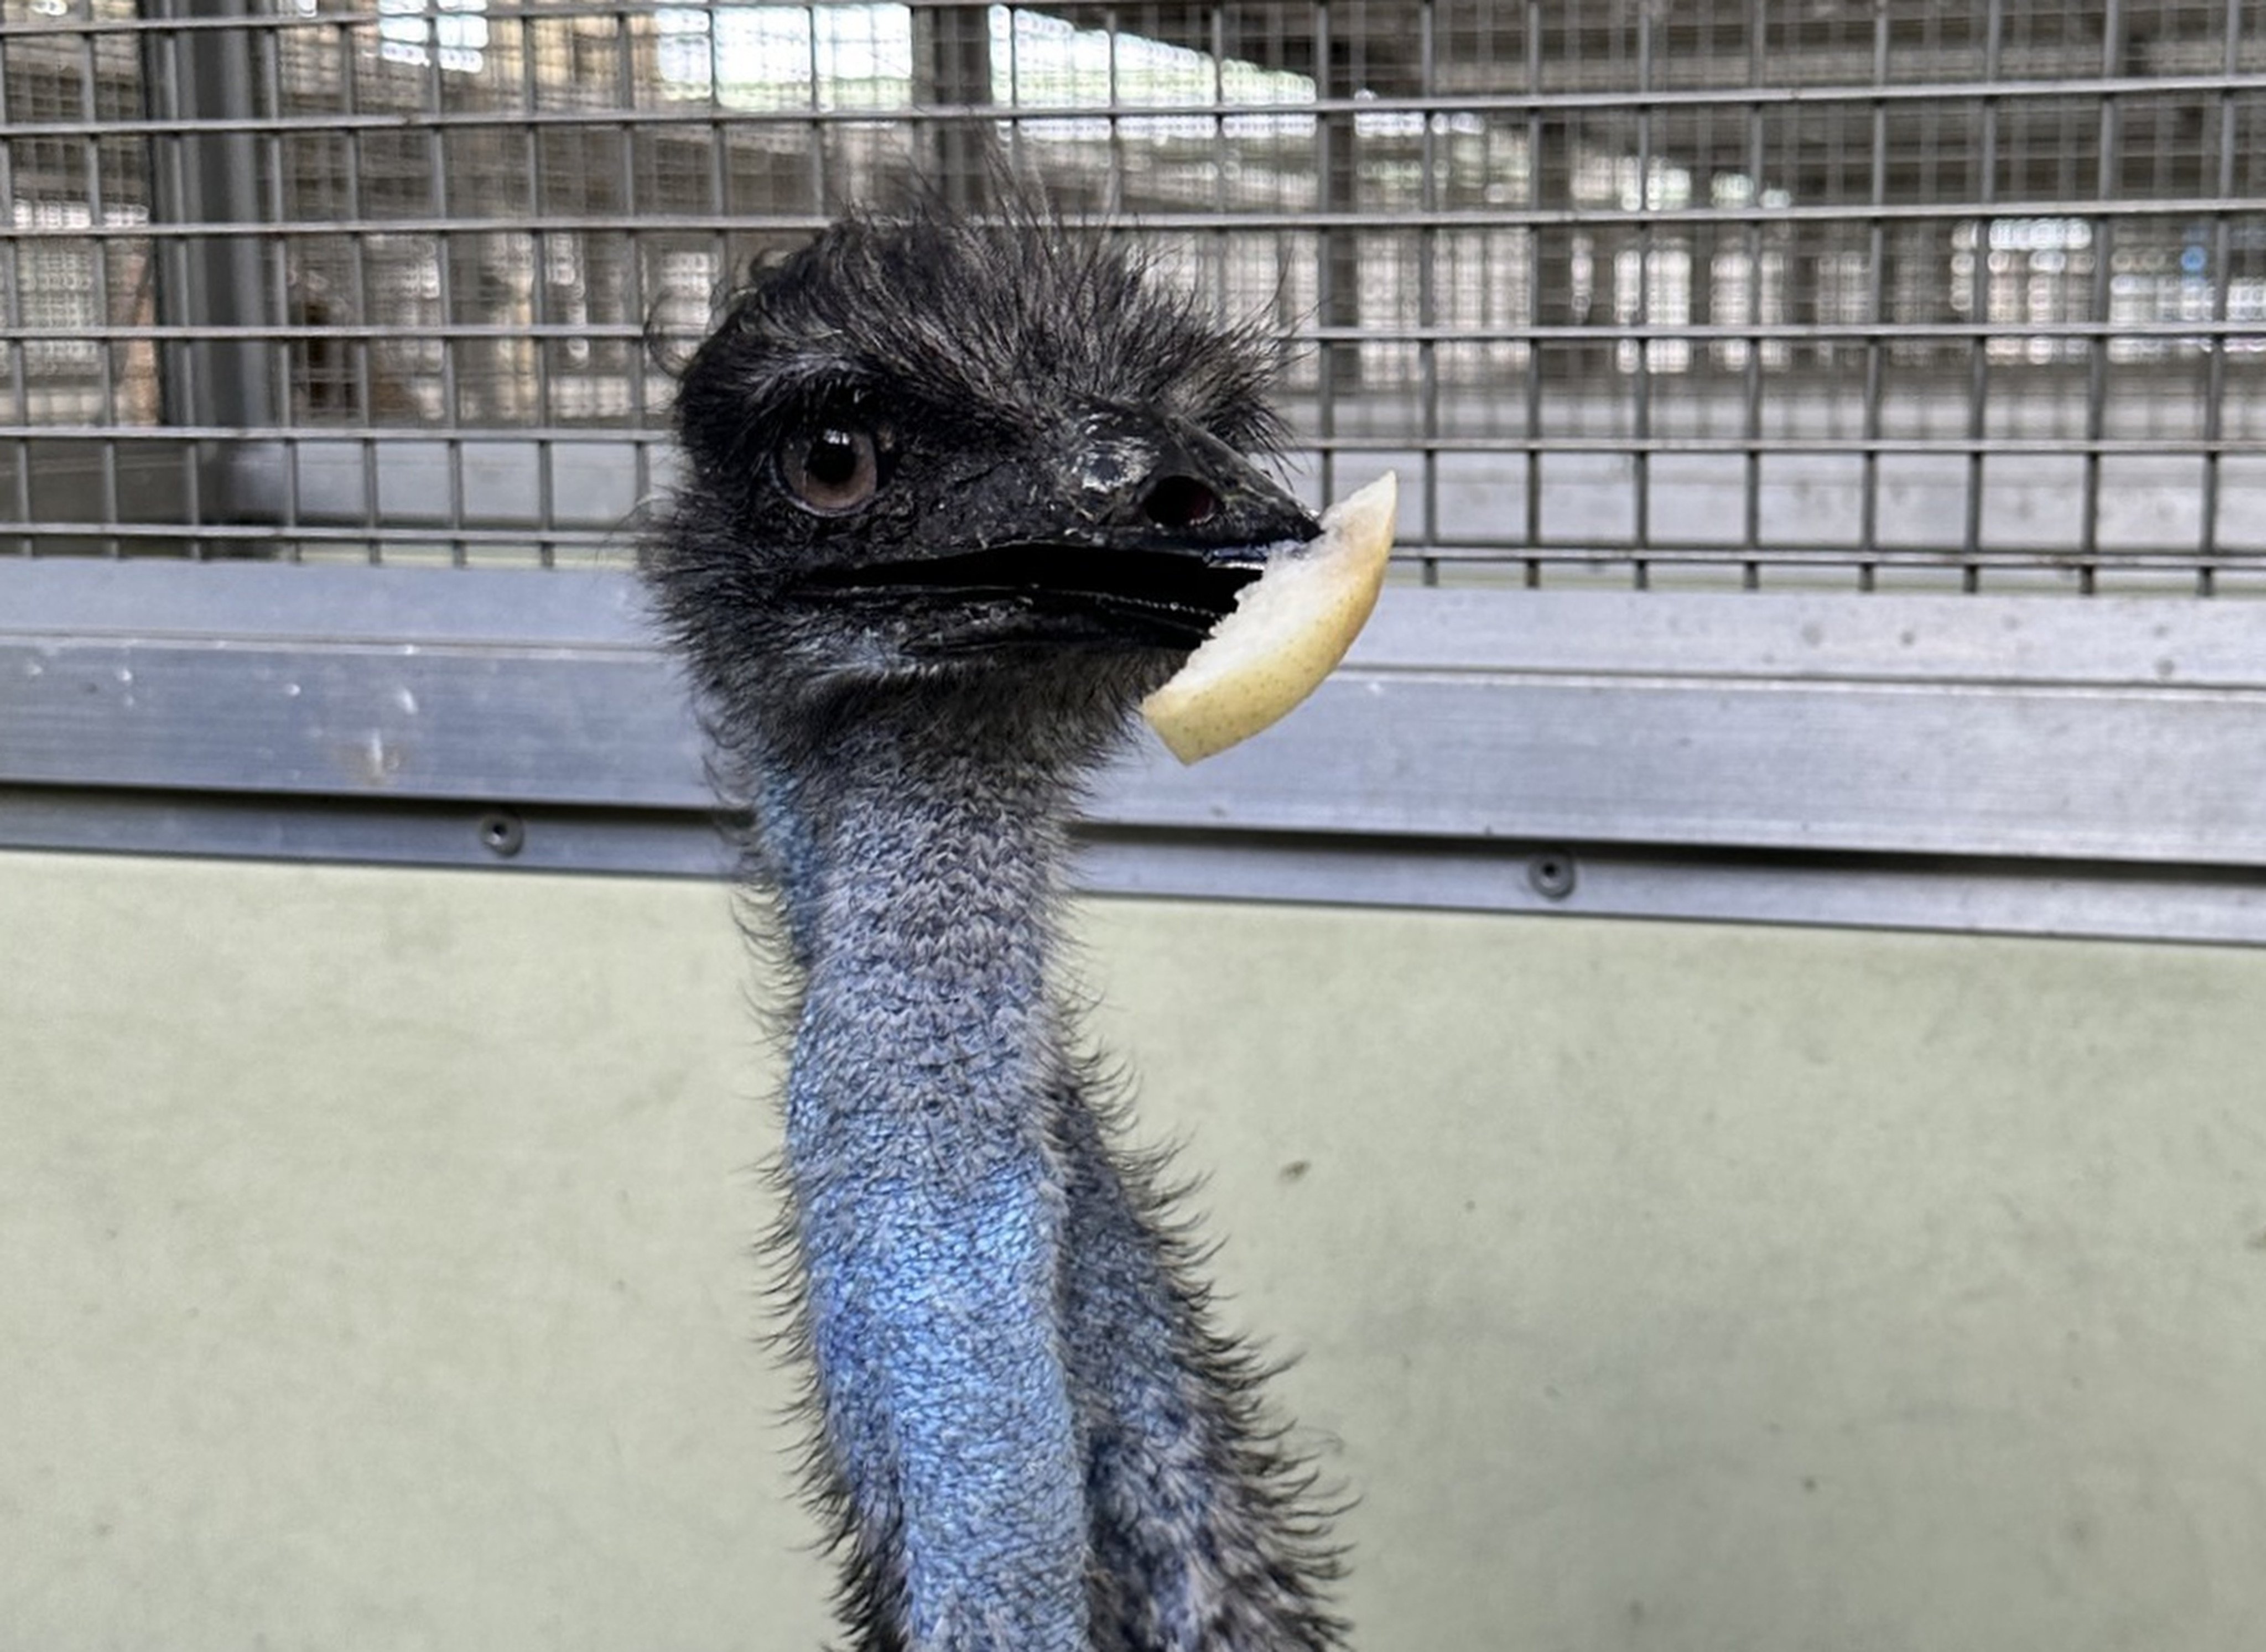 Wildlife authorities have said they are still liaising with animal welfare organisations to find a new home for the emu. Photo: Facebook/AFCD